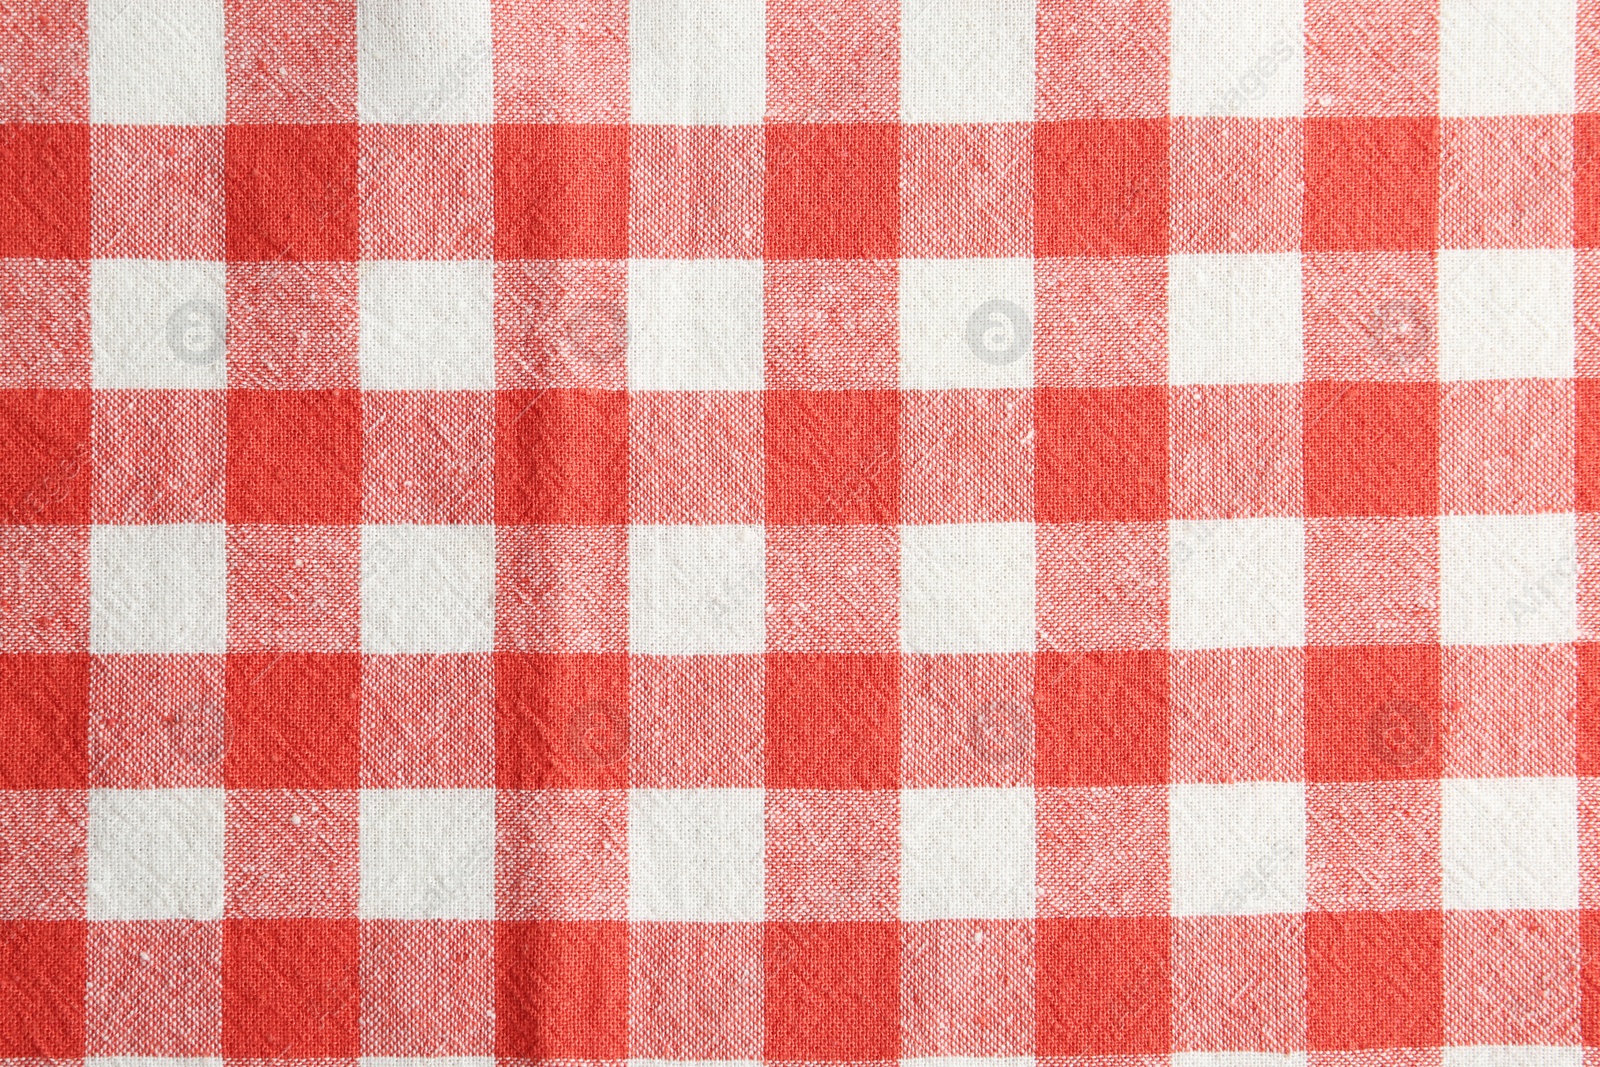 Photo of Texture of red checkered fabric as background, closeup